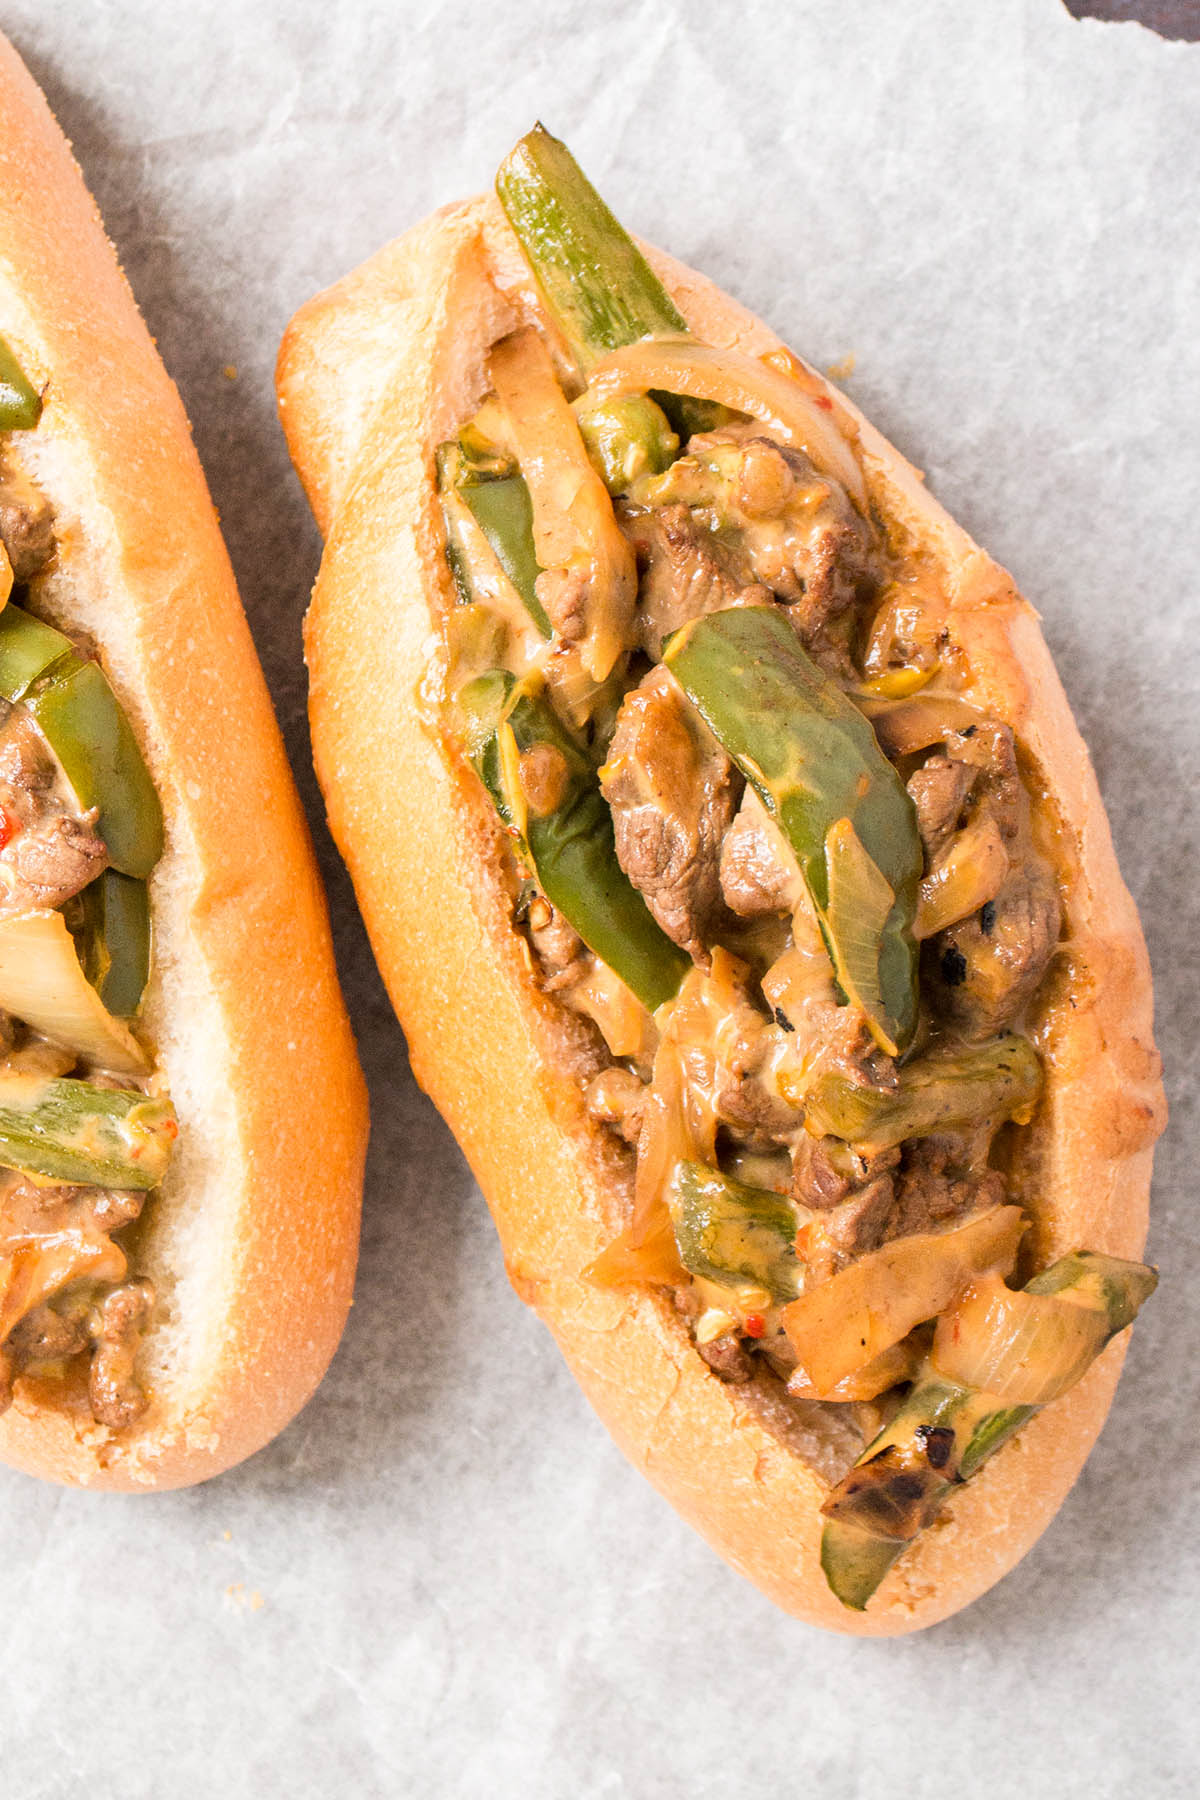 Mexi Cheesesteak Sandwiches served and looking extremely delicious